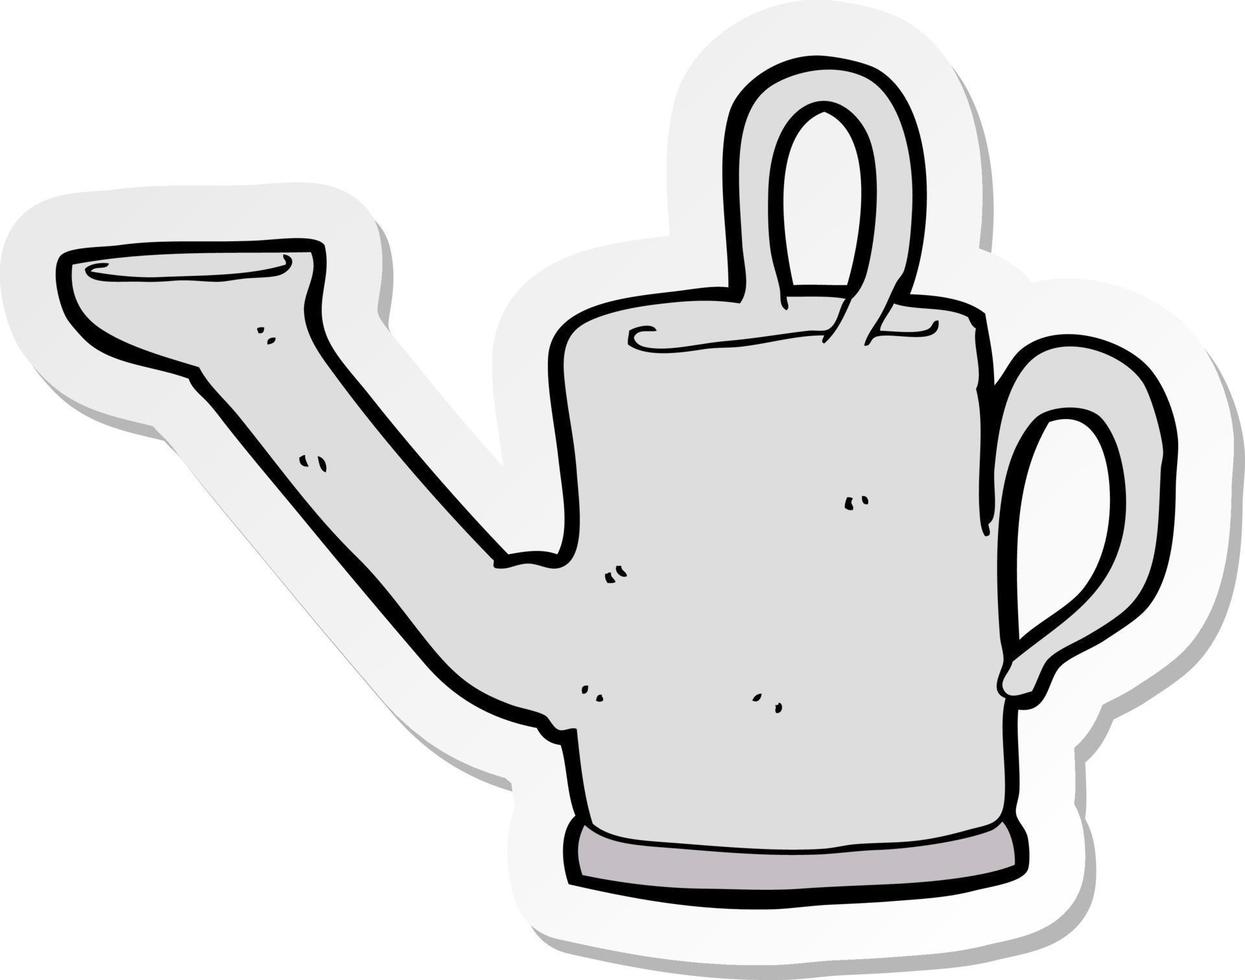 sticker of a watering can cartoon vector